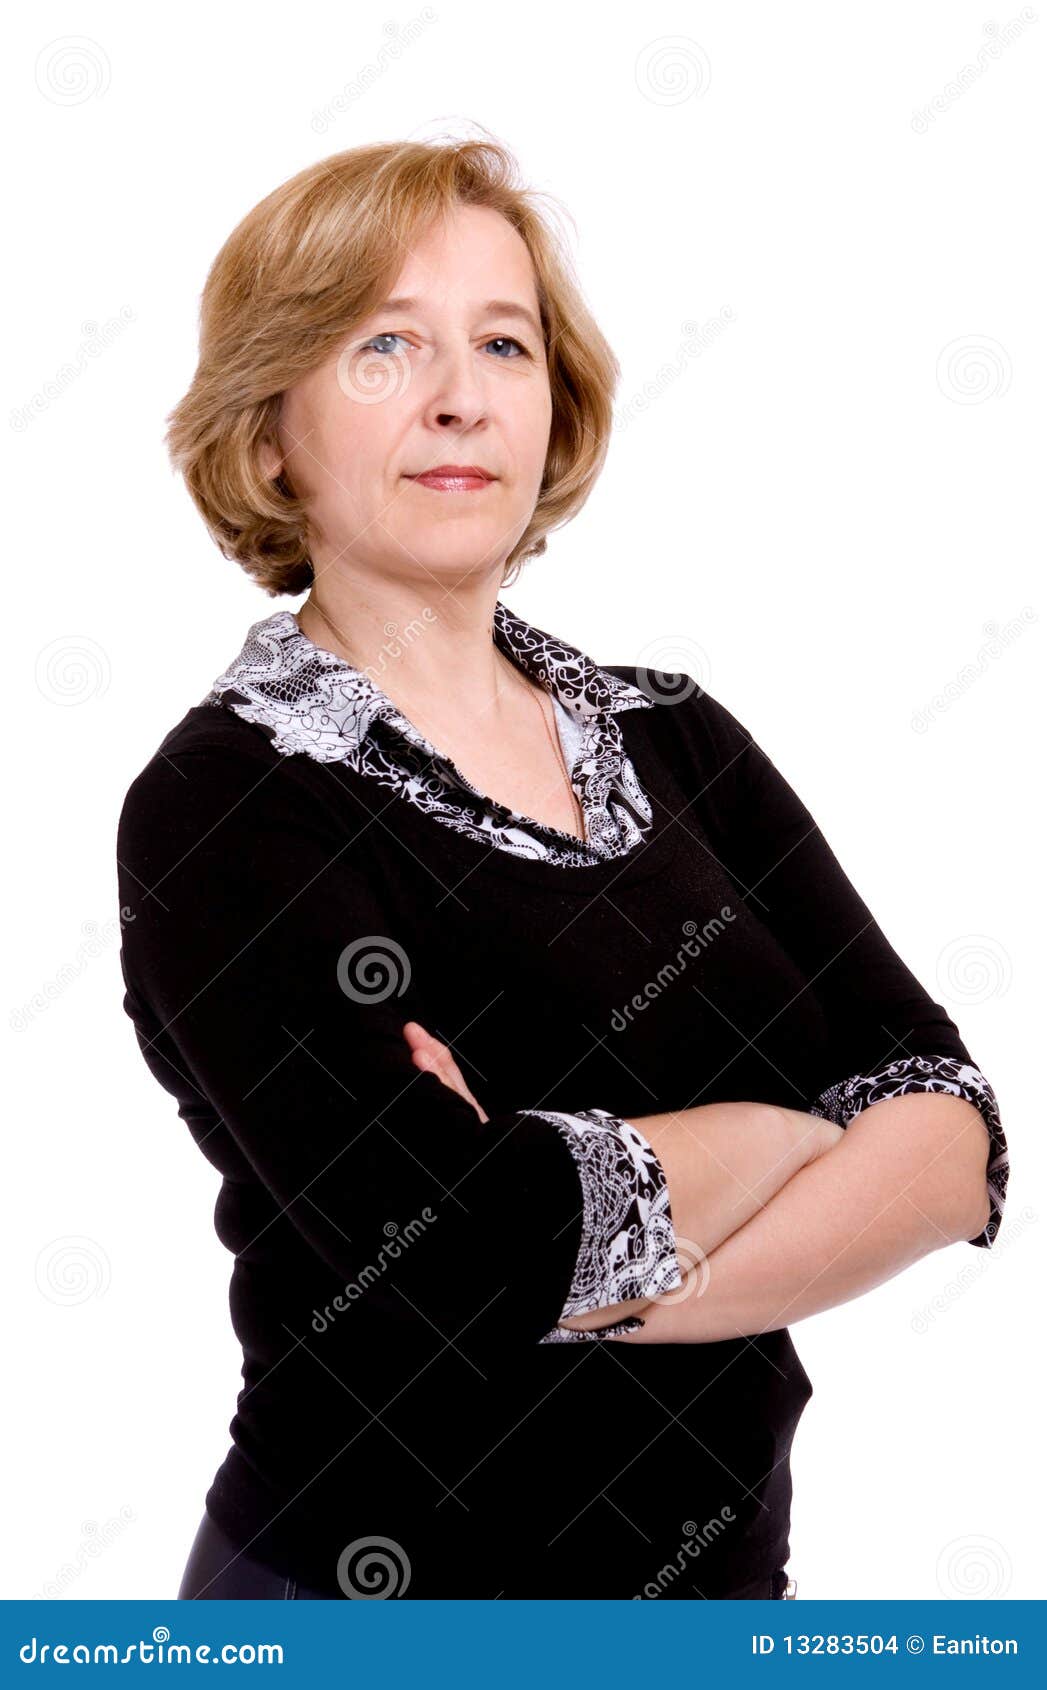 https://thumbs.dreamstime.com/z/middle-aged-woman-13283504.jpg